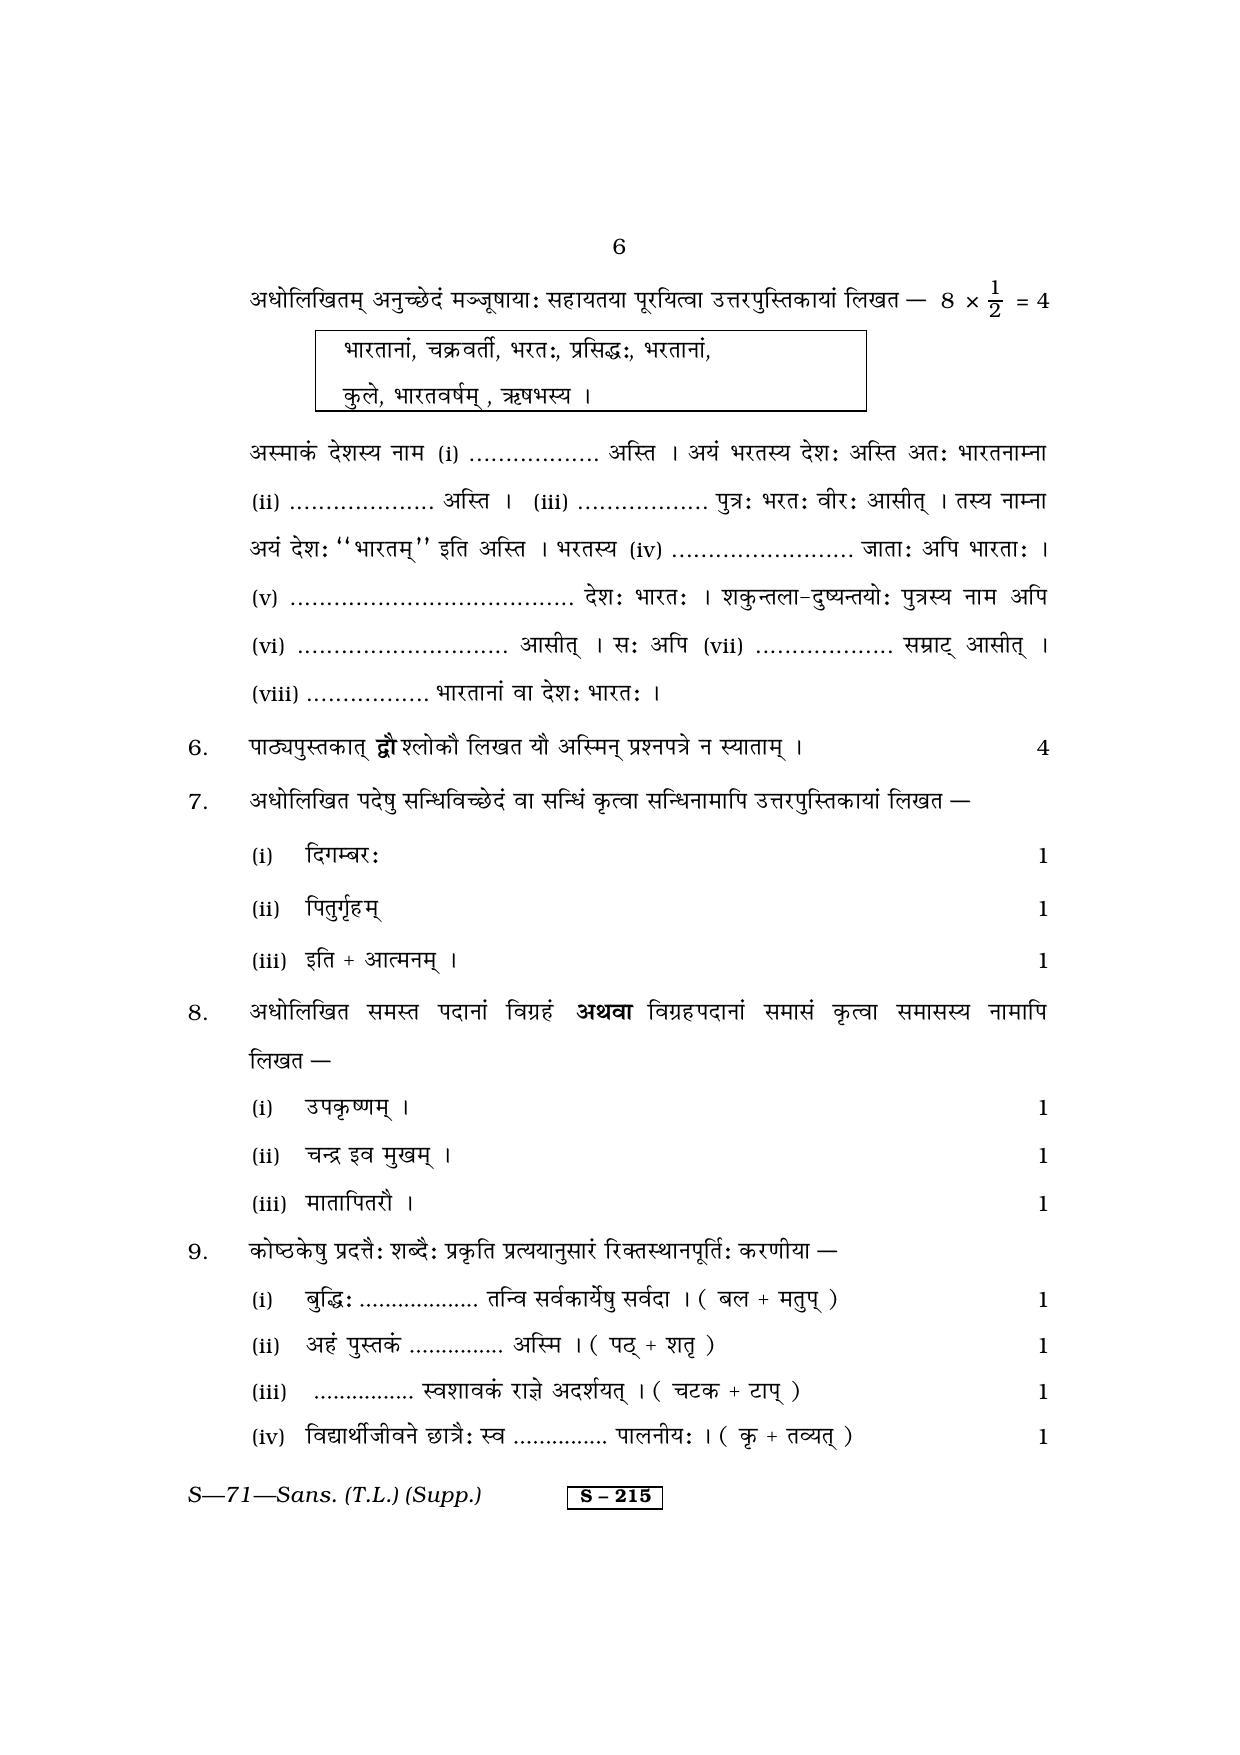 RBSE Class 10 Sanskrit (T.L.) Supplementary 2013 Question Paper - Page 6